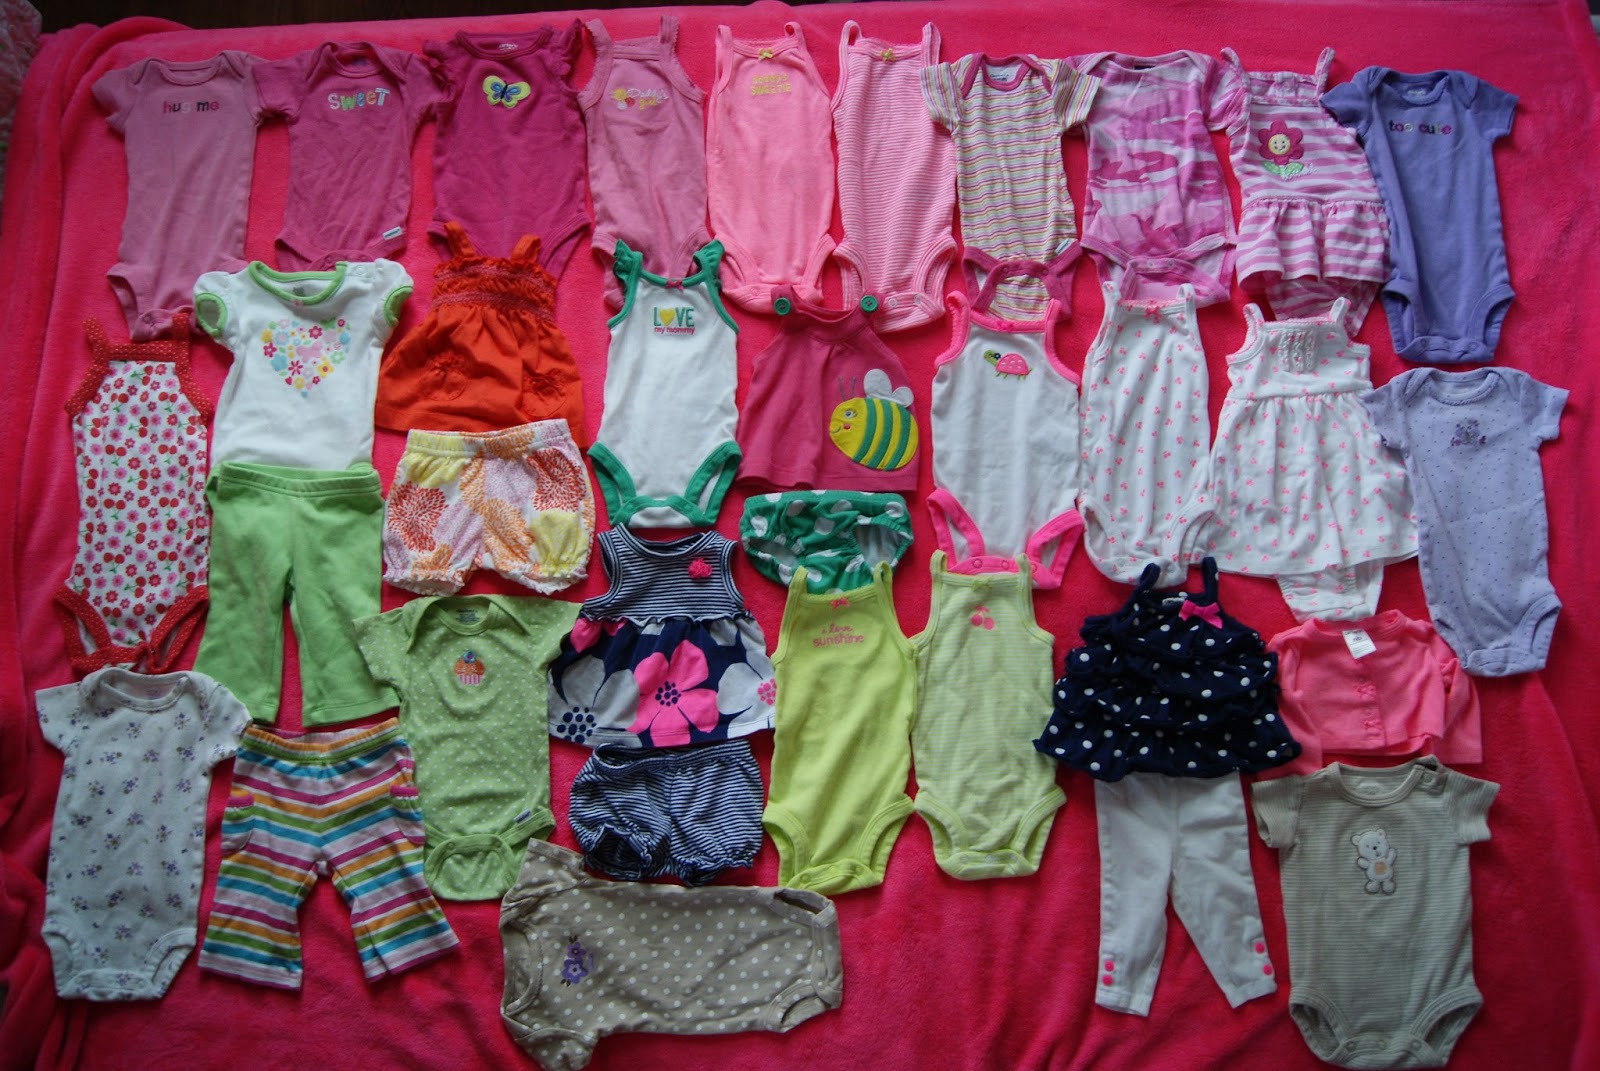 Newborn clothes, 34 items for $47